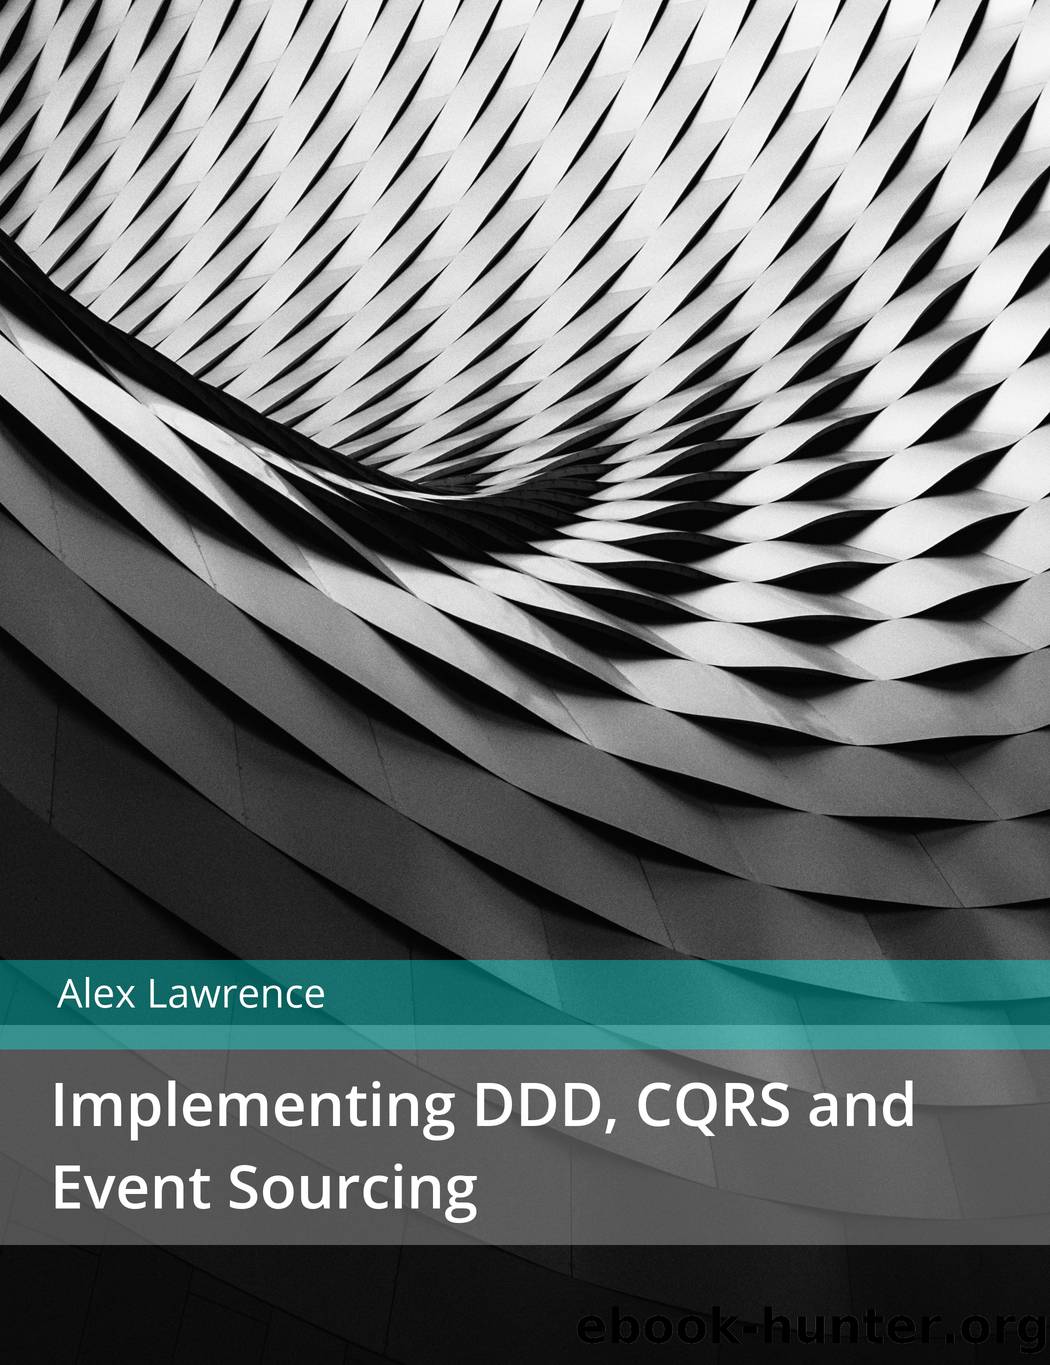 Implementing DDD, CQRS and Event Sourcing by Alex Lawrence